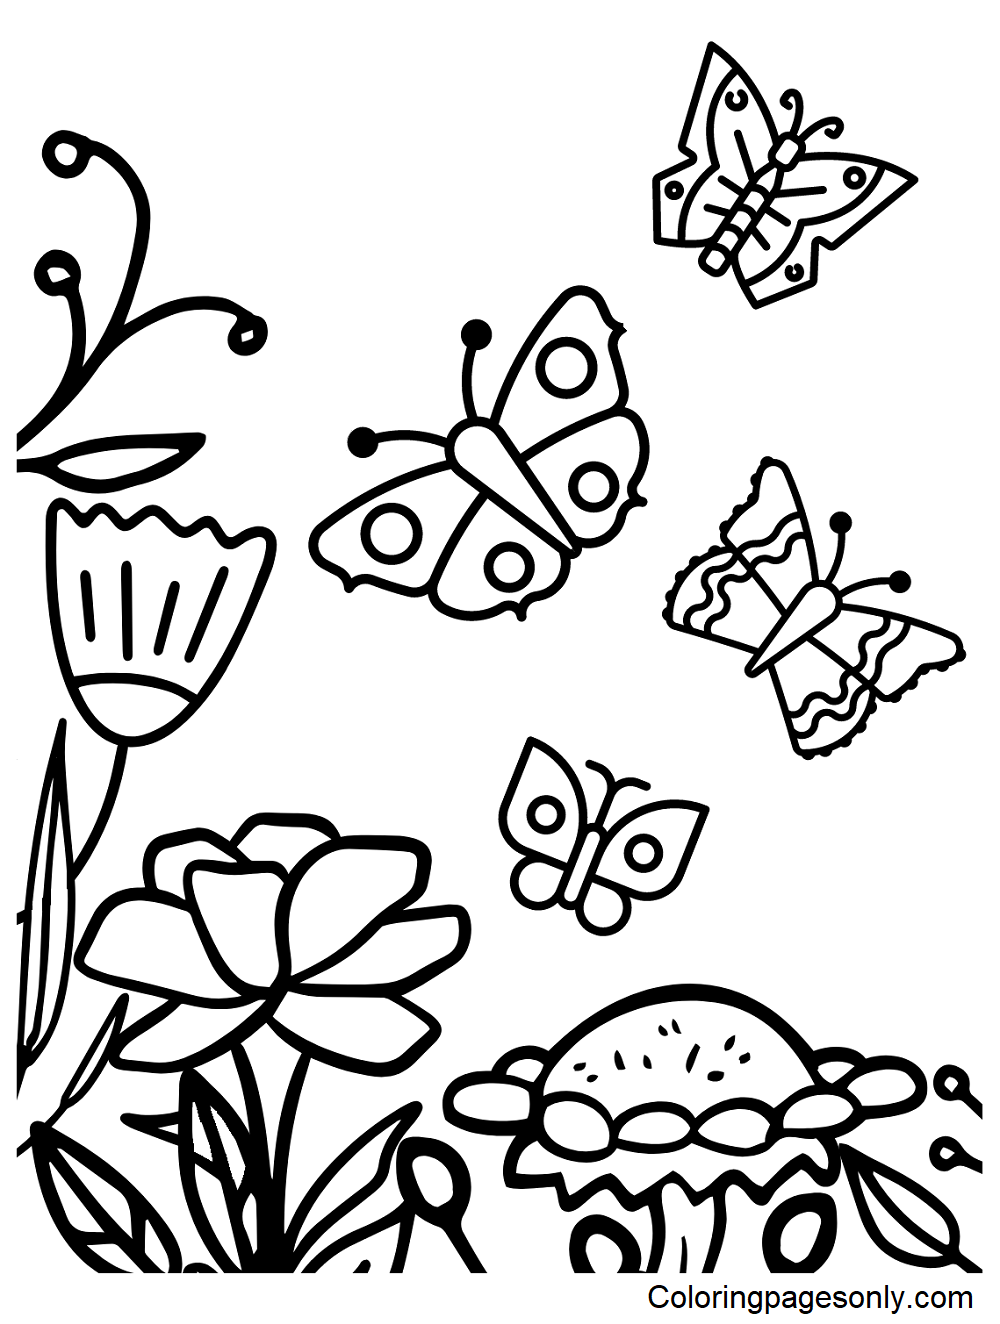 Butterflies with Flowers Coloring Pages